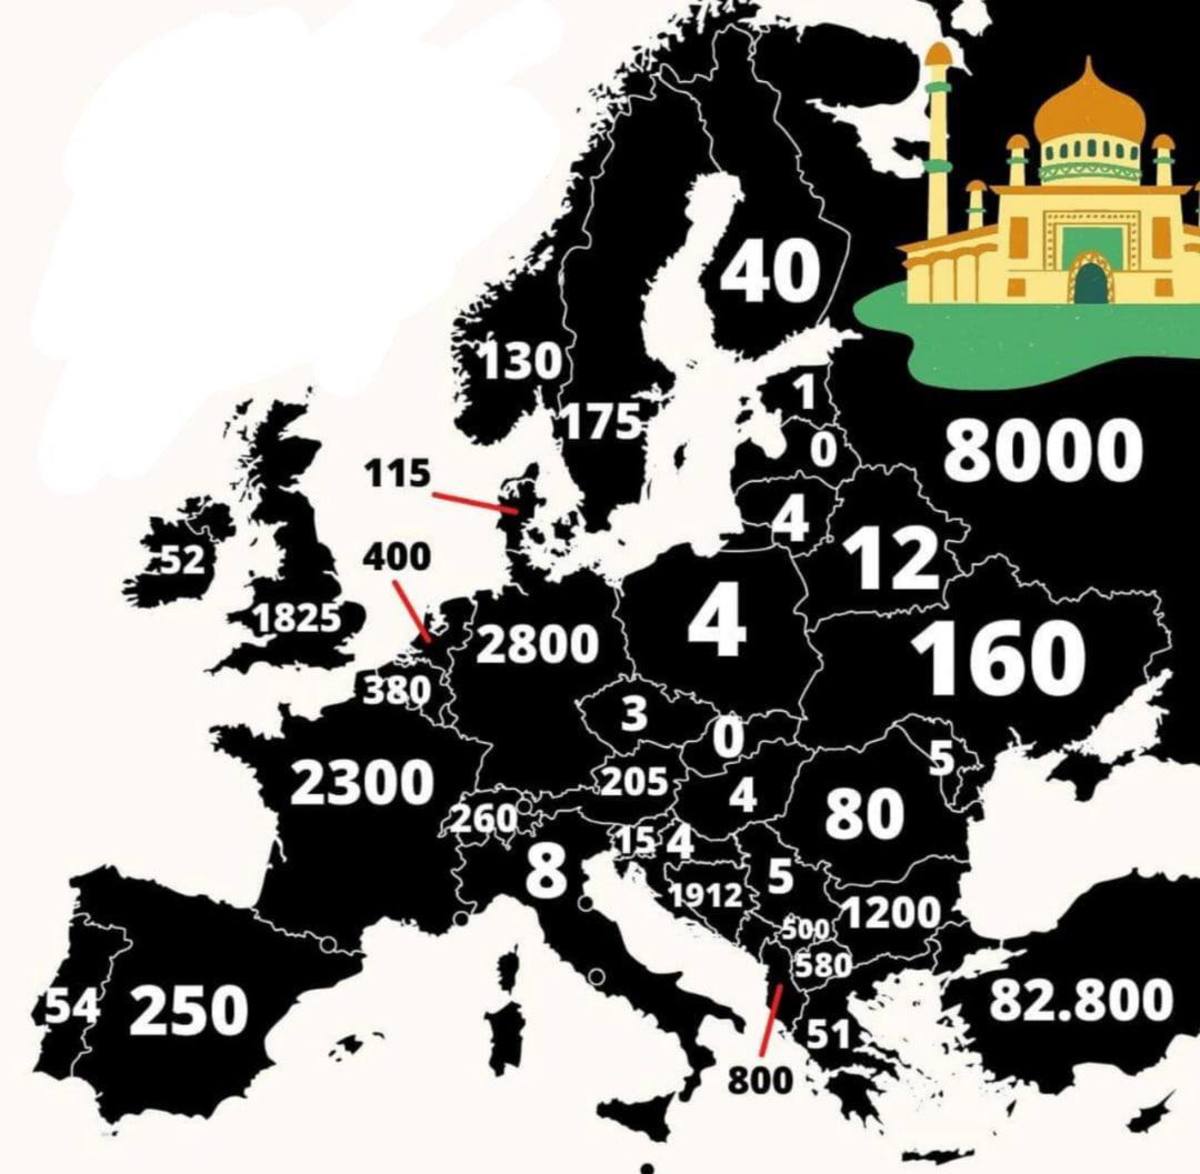 Mosques in Europe